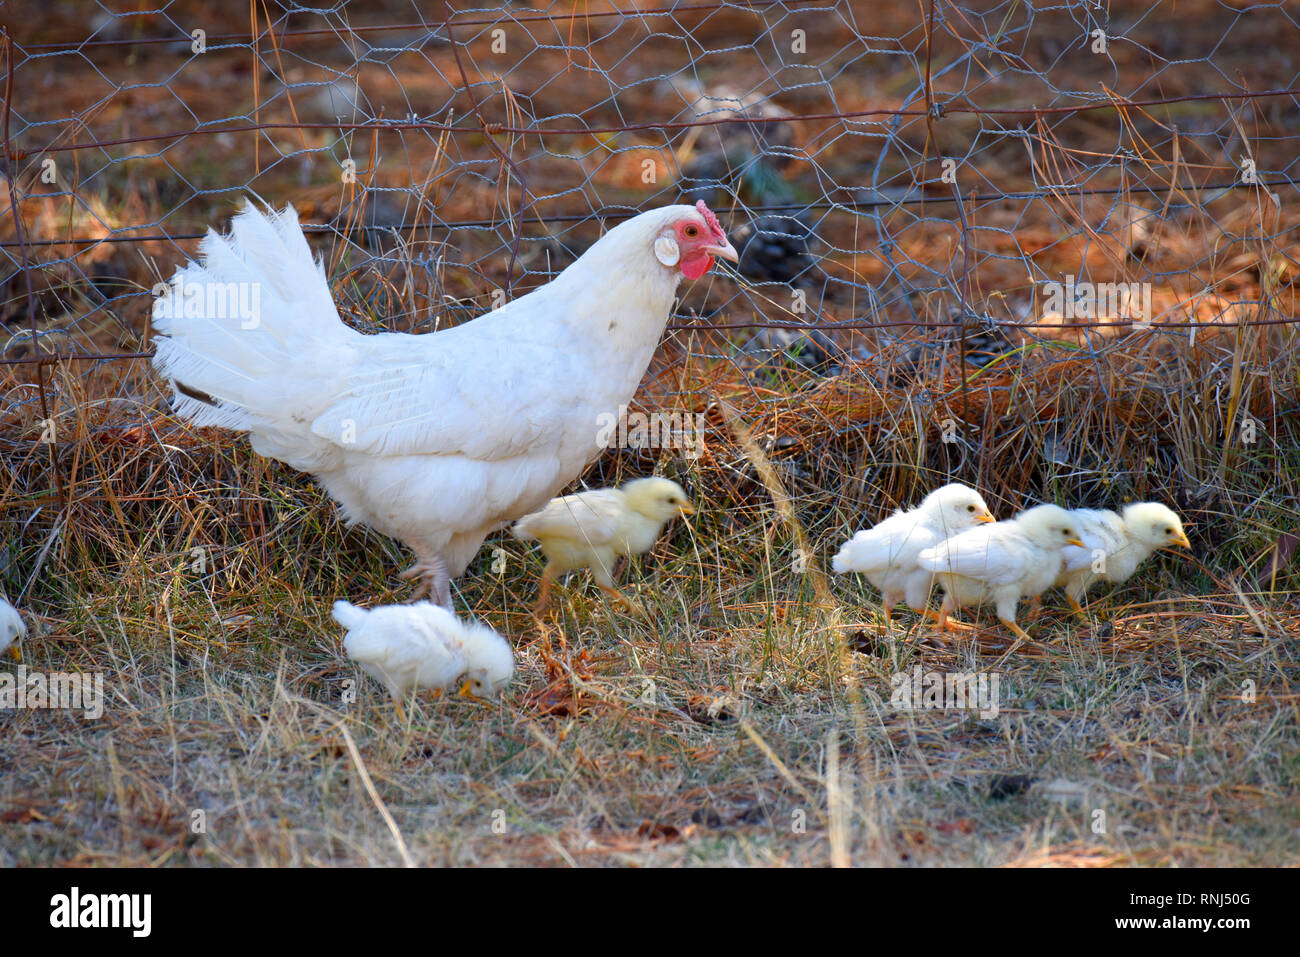 mother hen and her chicks at Emmaville in n orthern new south wales, australia Stock Photo